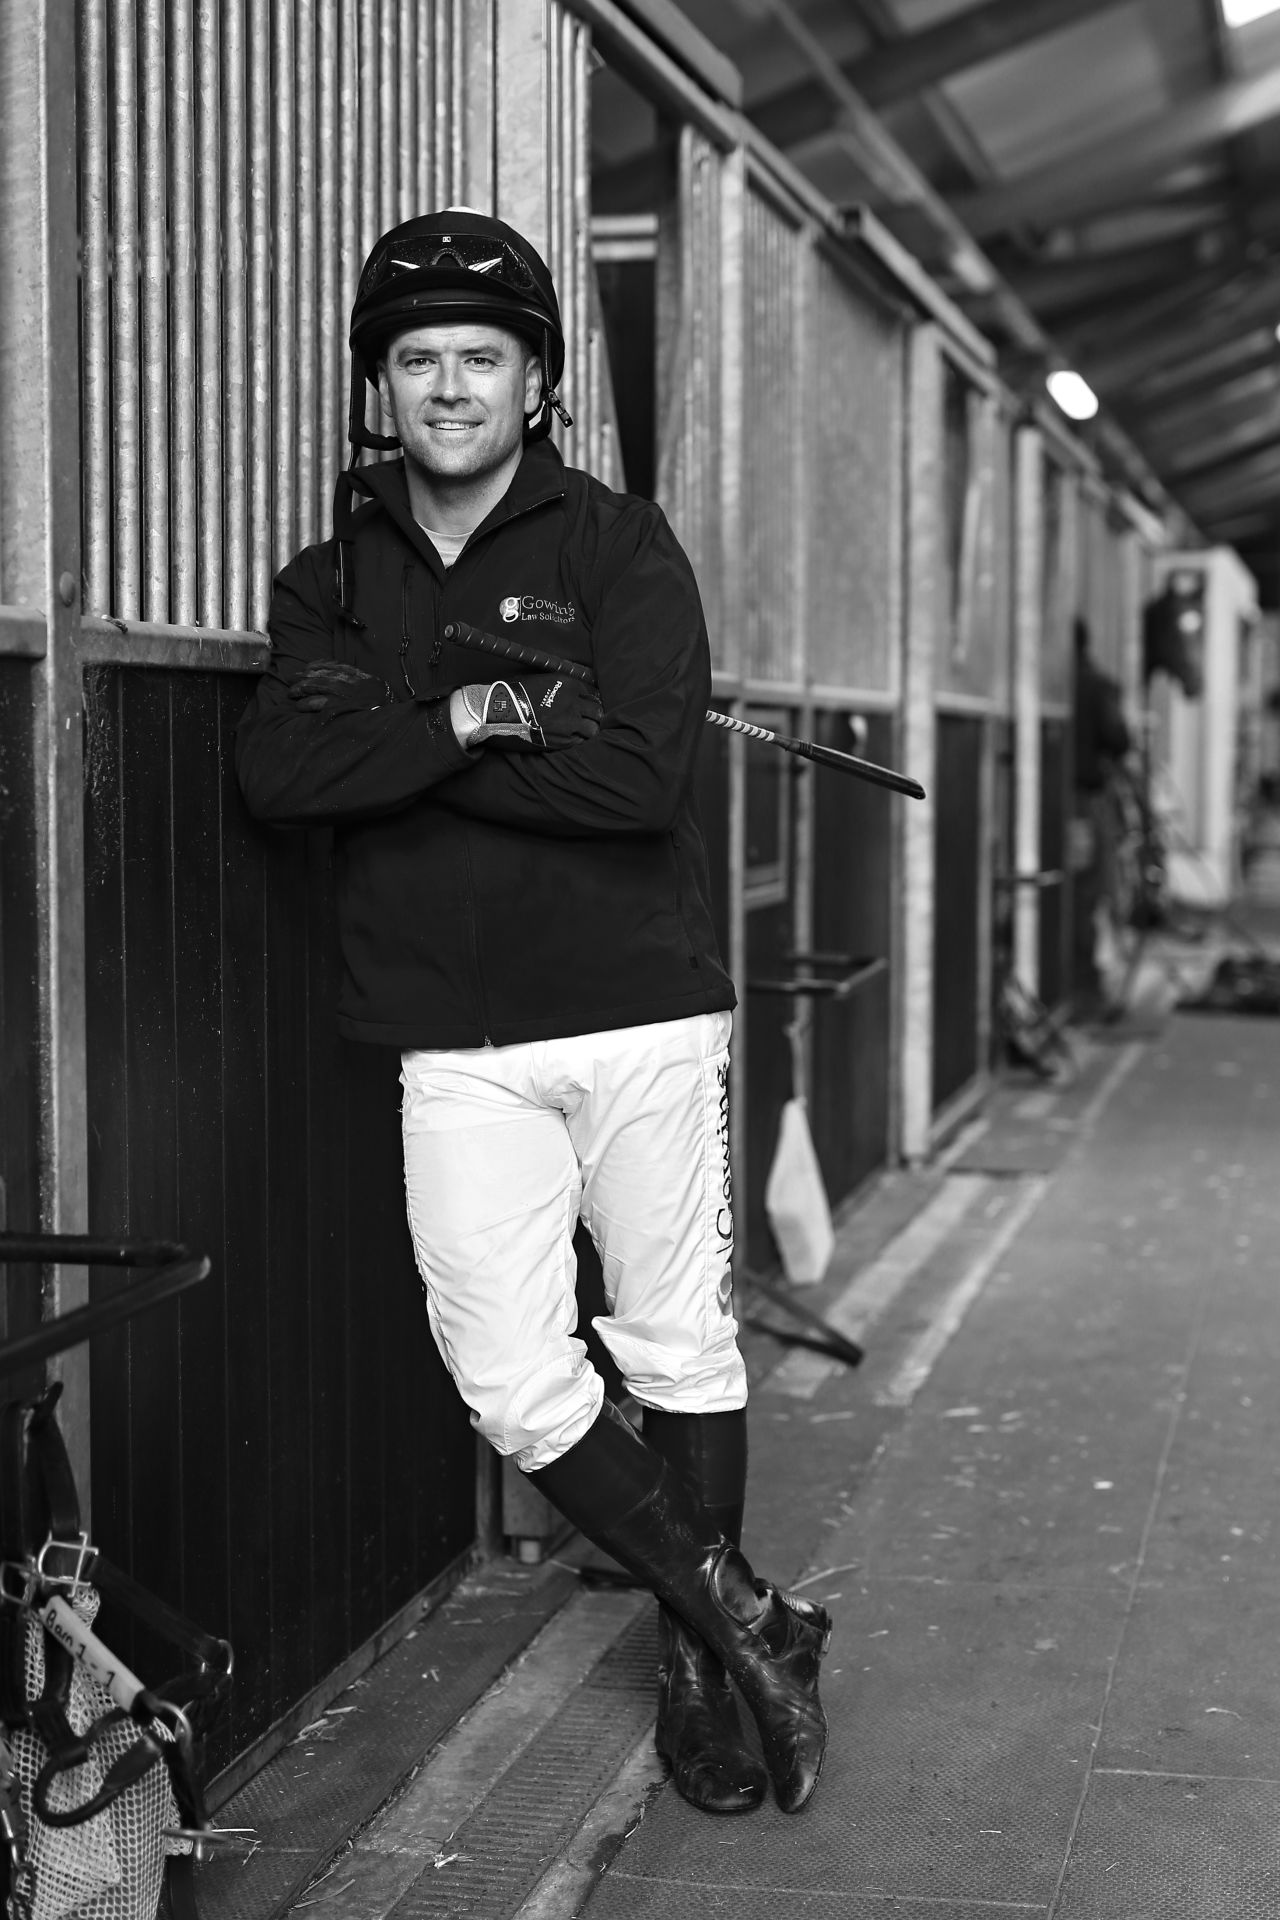 Michael Owen has already established himself as a successful racehorse owner and breeder.